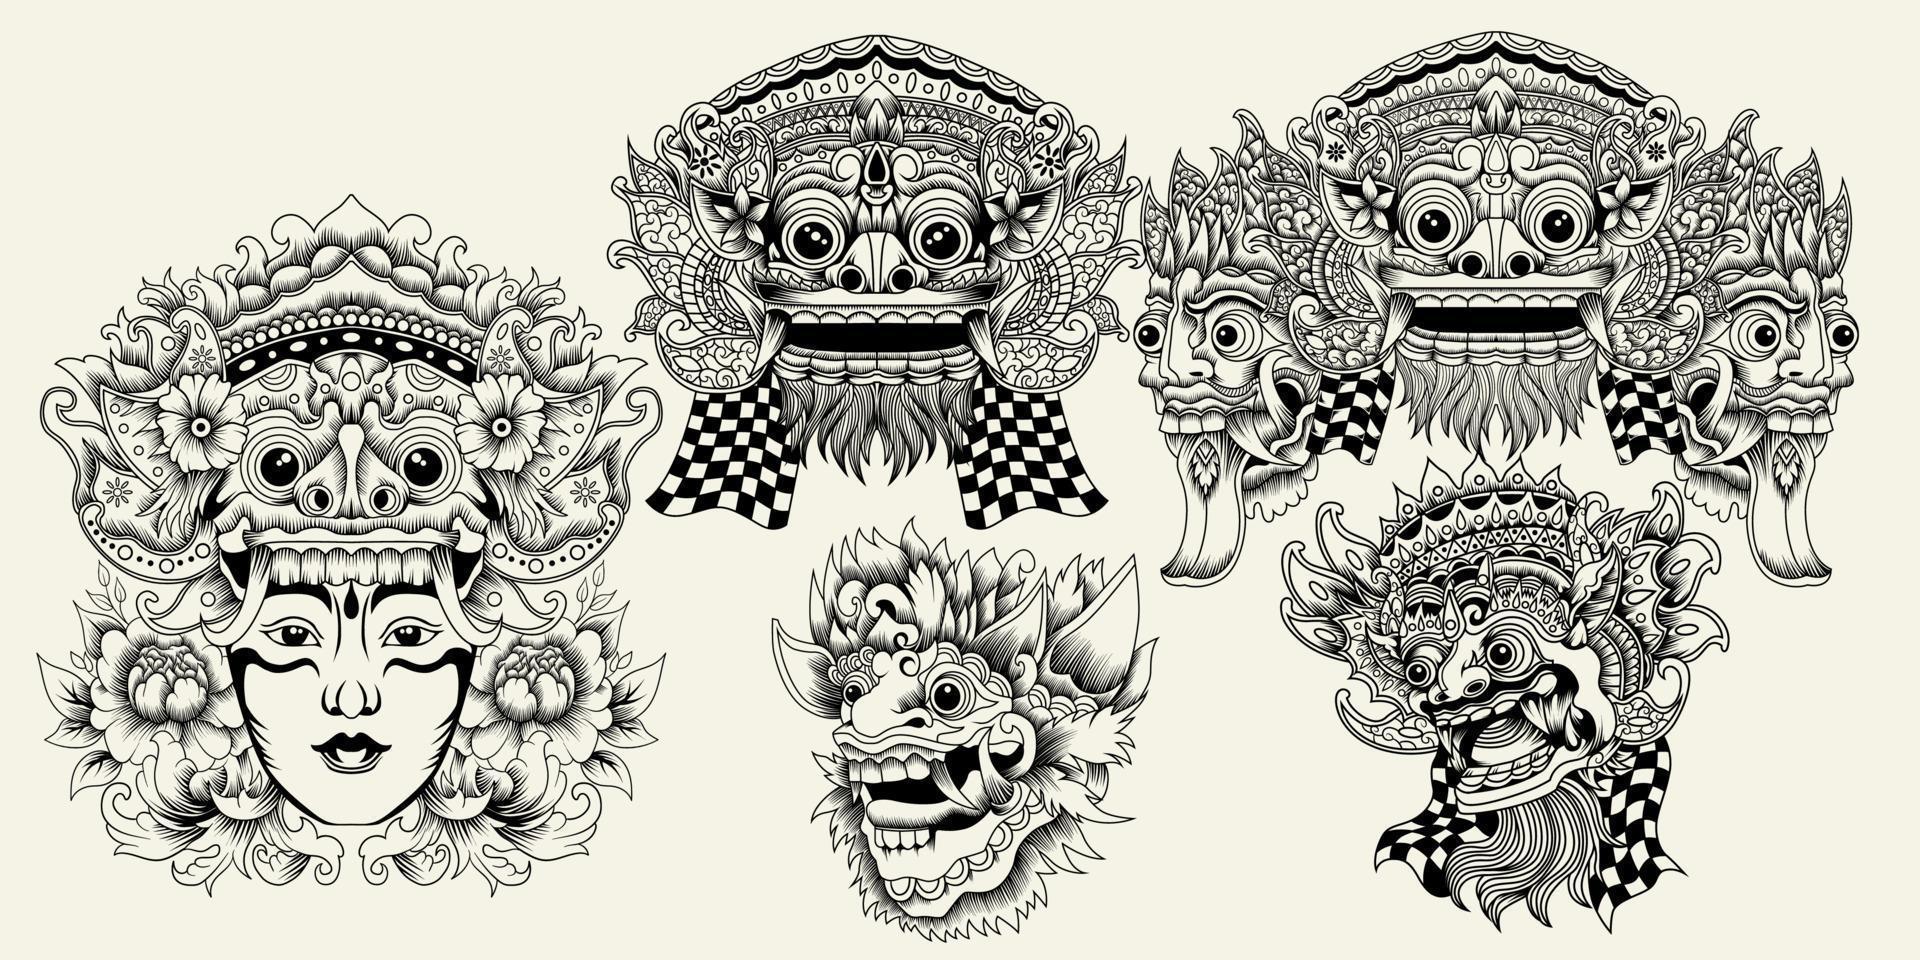 Balinese Barong vector illustration in black and white